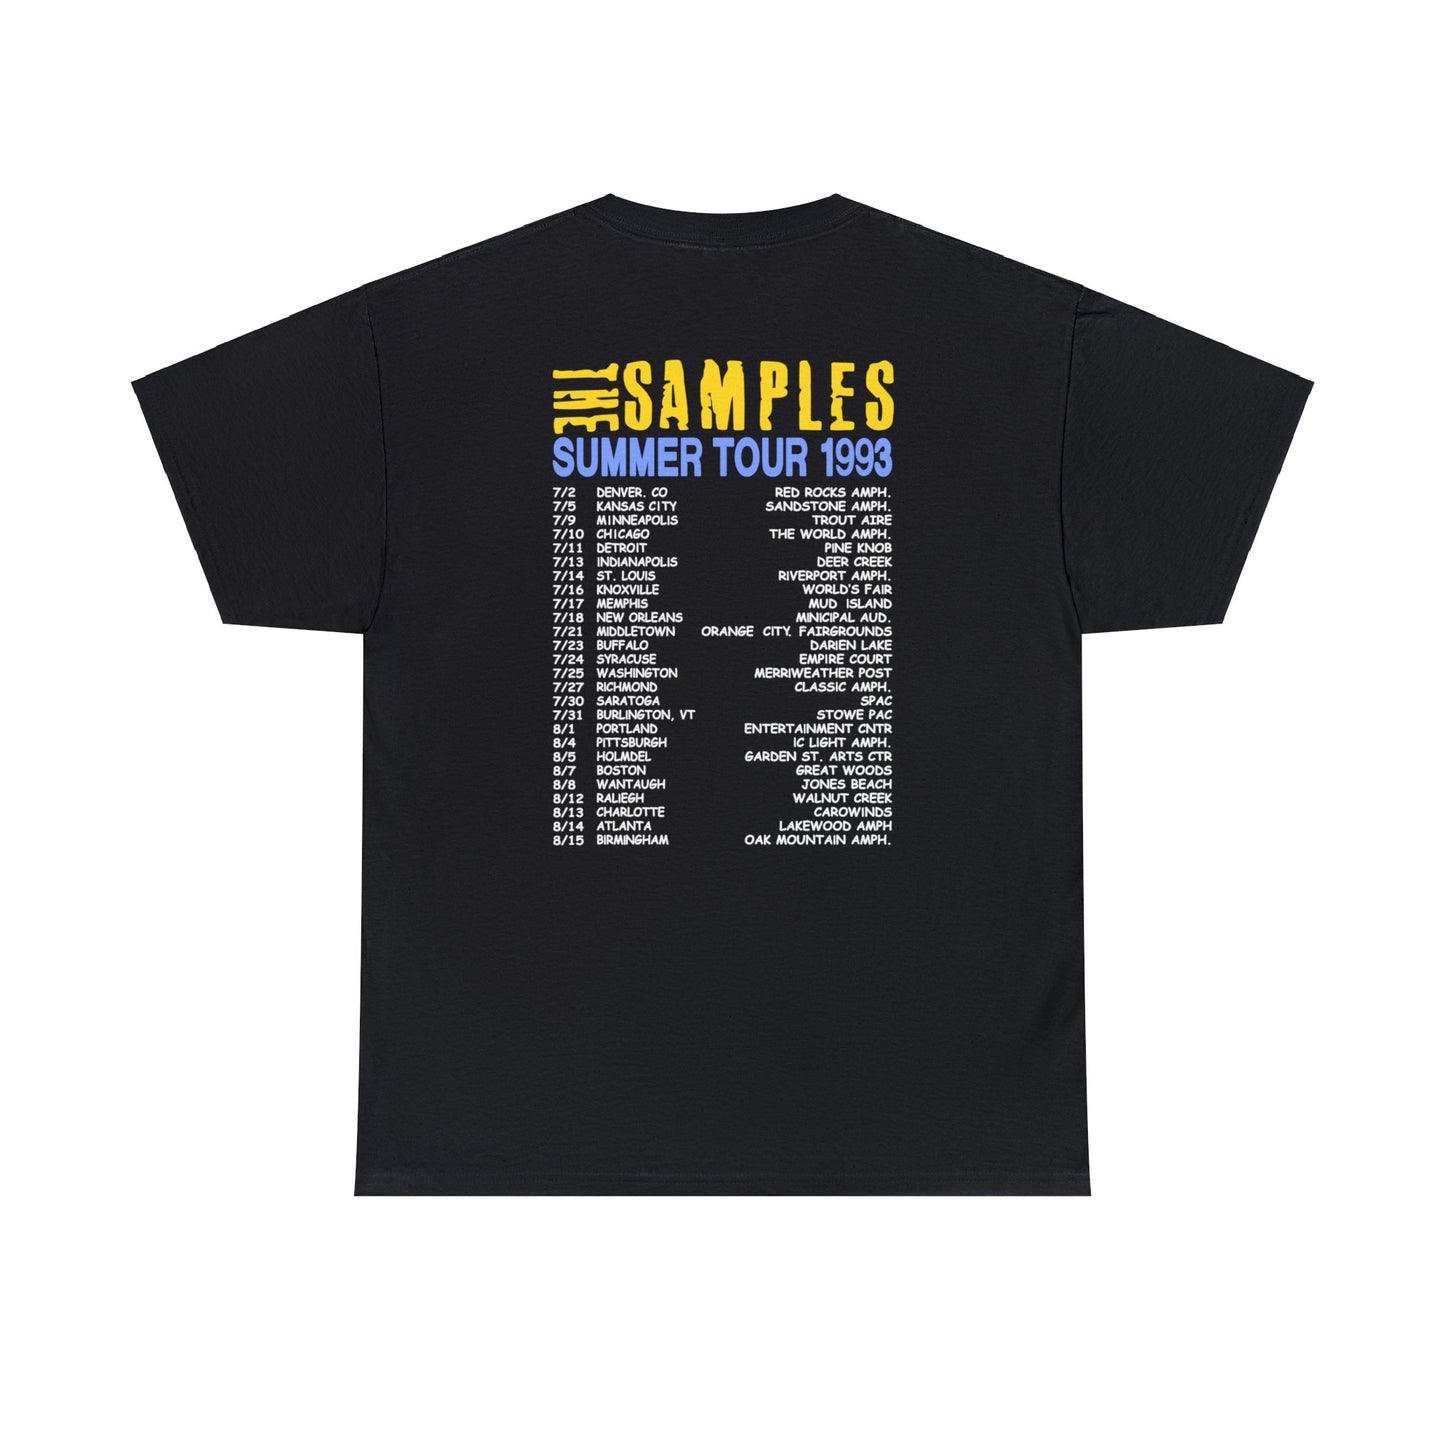 The Samples The Last Drag Summer Tour 1993 T-shirt for Sale